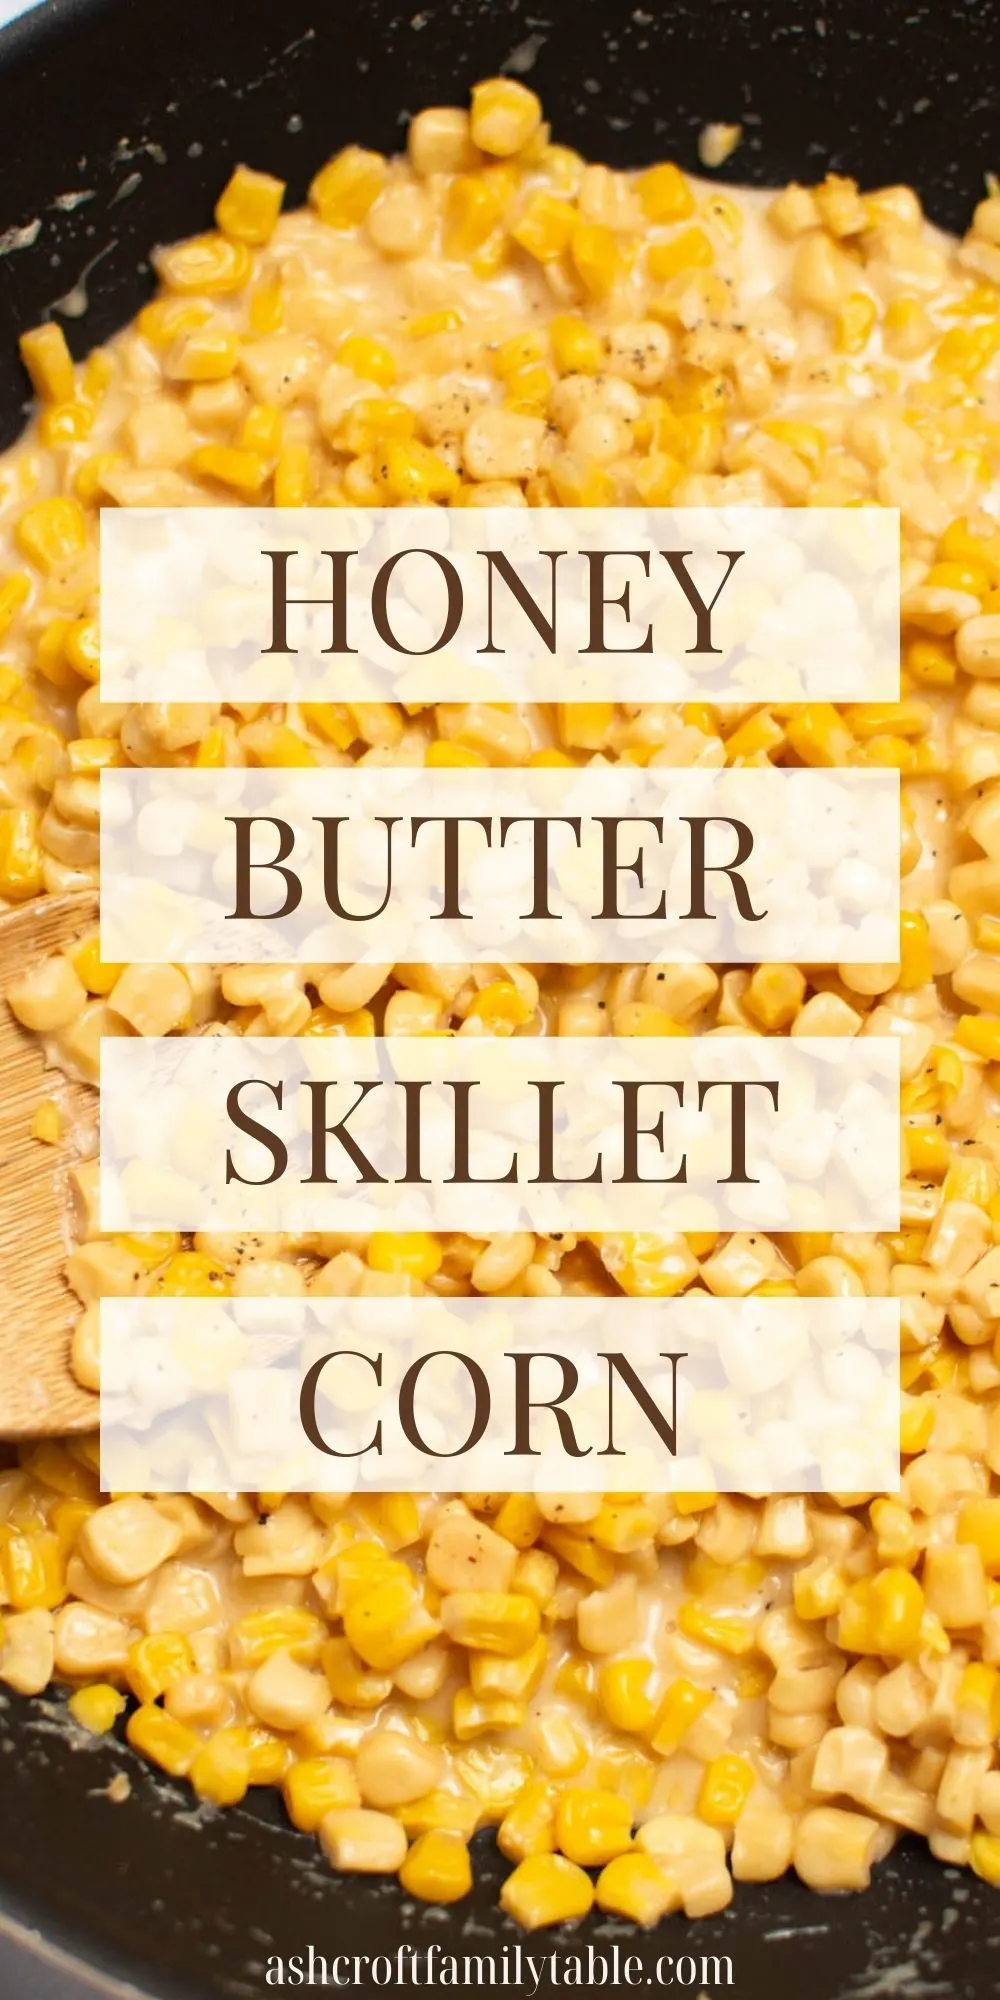 Pinterest graphic with text and photo of skillet full of corn.